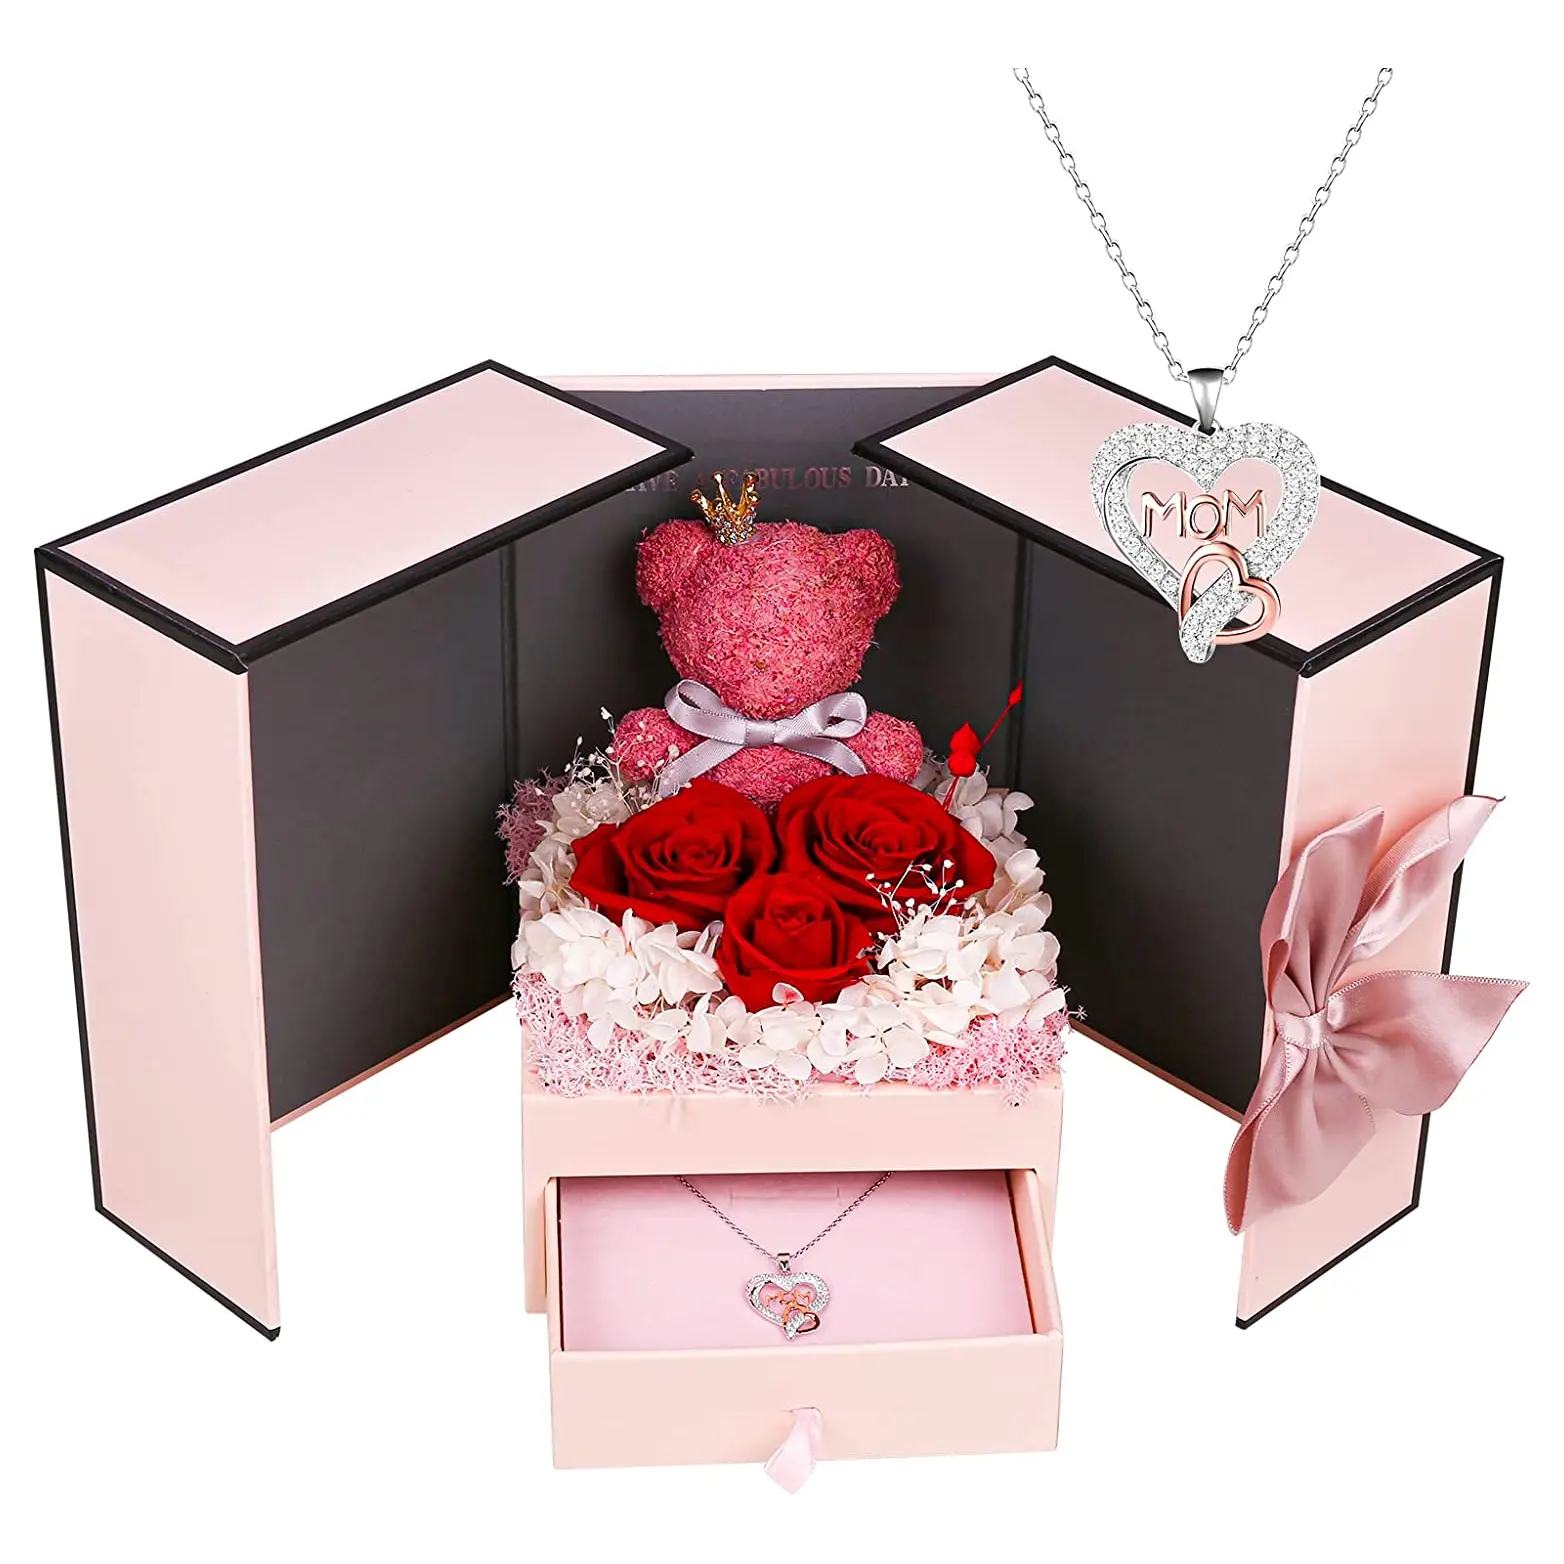 eco-friendly cadeaux regalos Preserved rose eternal flower women birthday novelty gifts mom gift mother's day 2023 gifts & craft